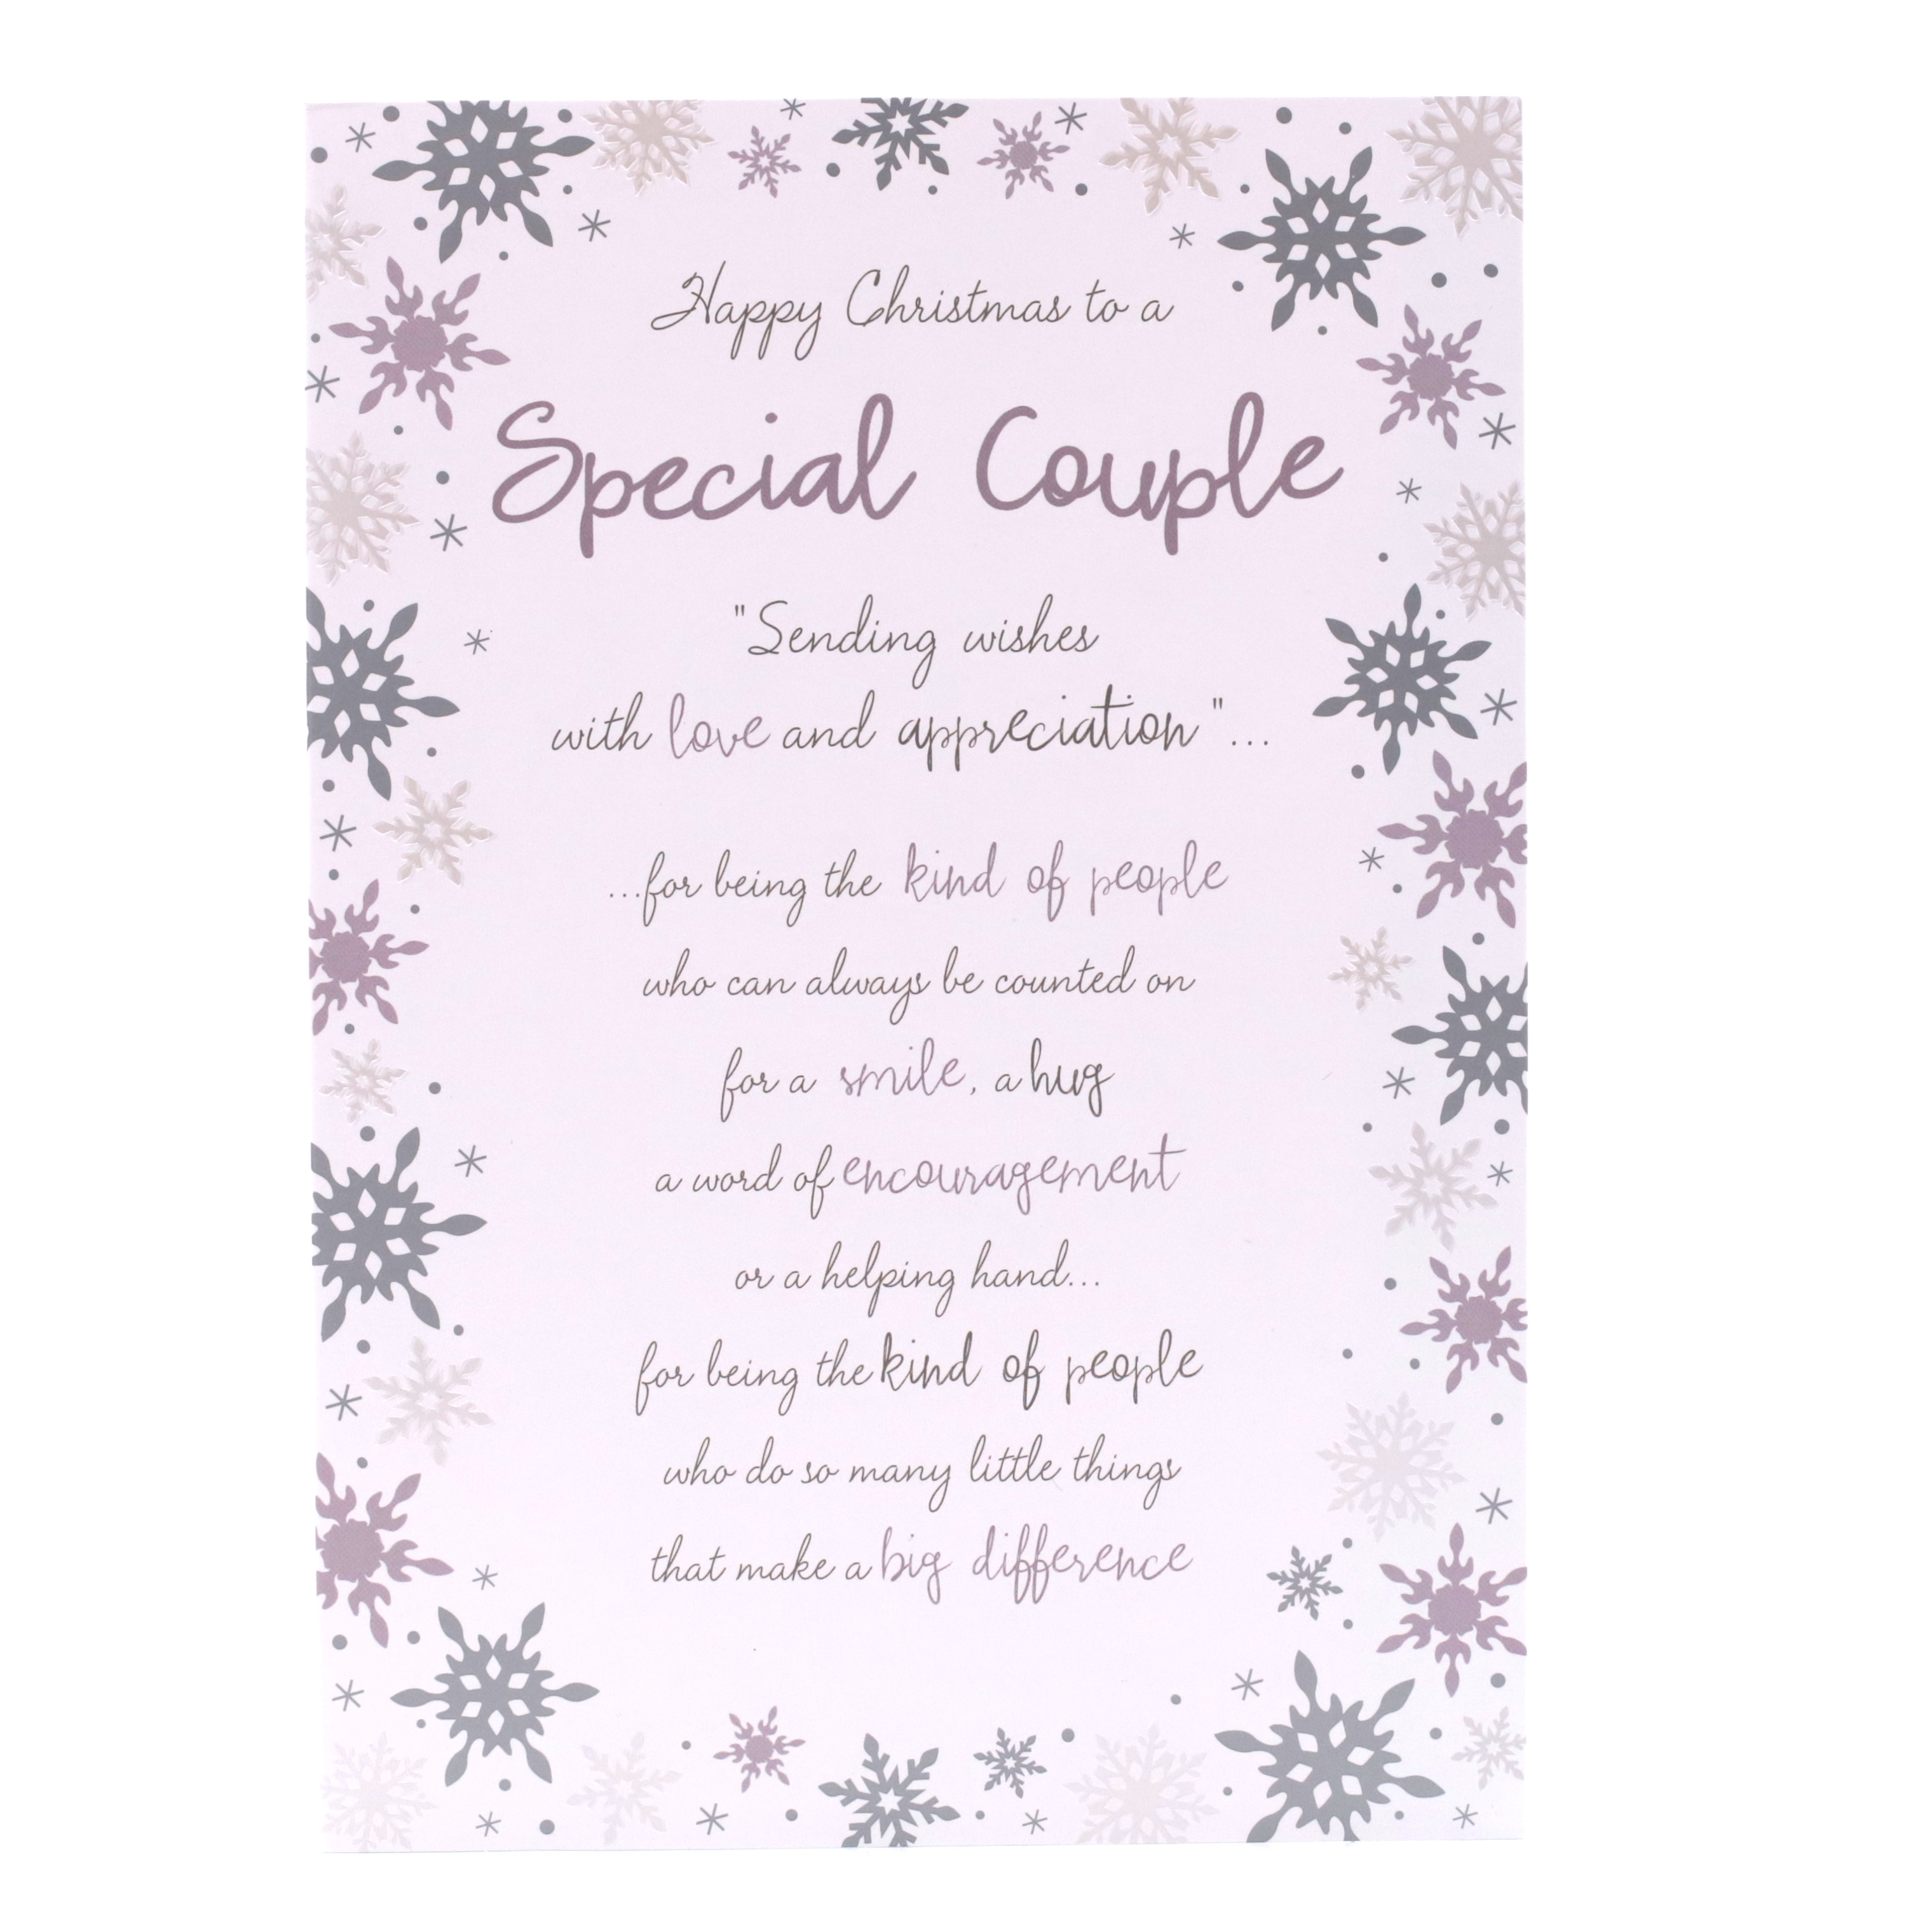 SPECIAL FRIEND CHRISTMAS CARD ~ TRADITIONAL DESIGN ~ QUALITY CARD & NICE VERSE 